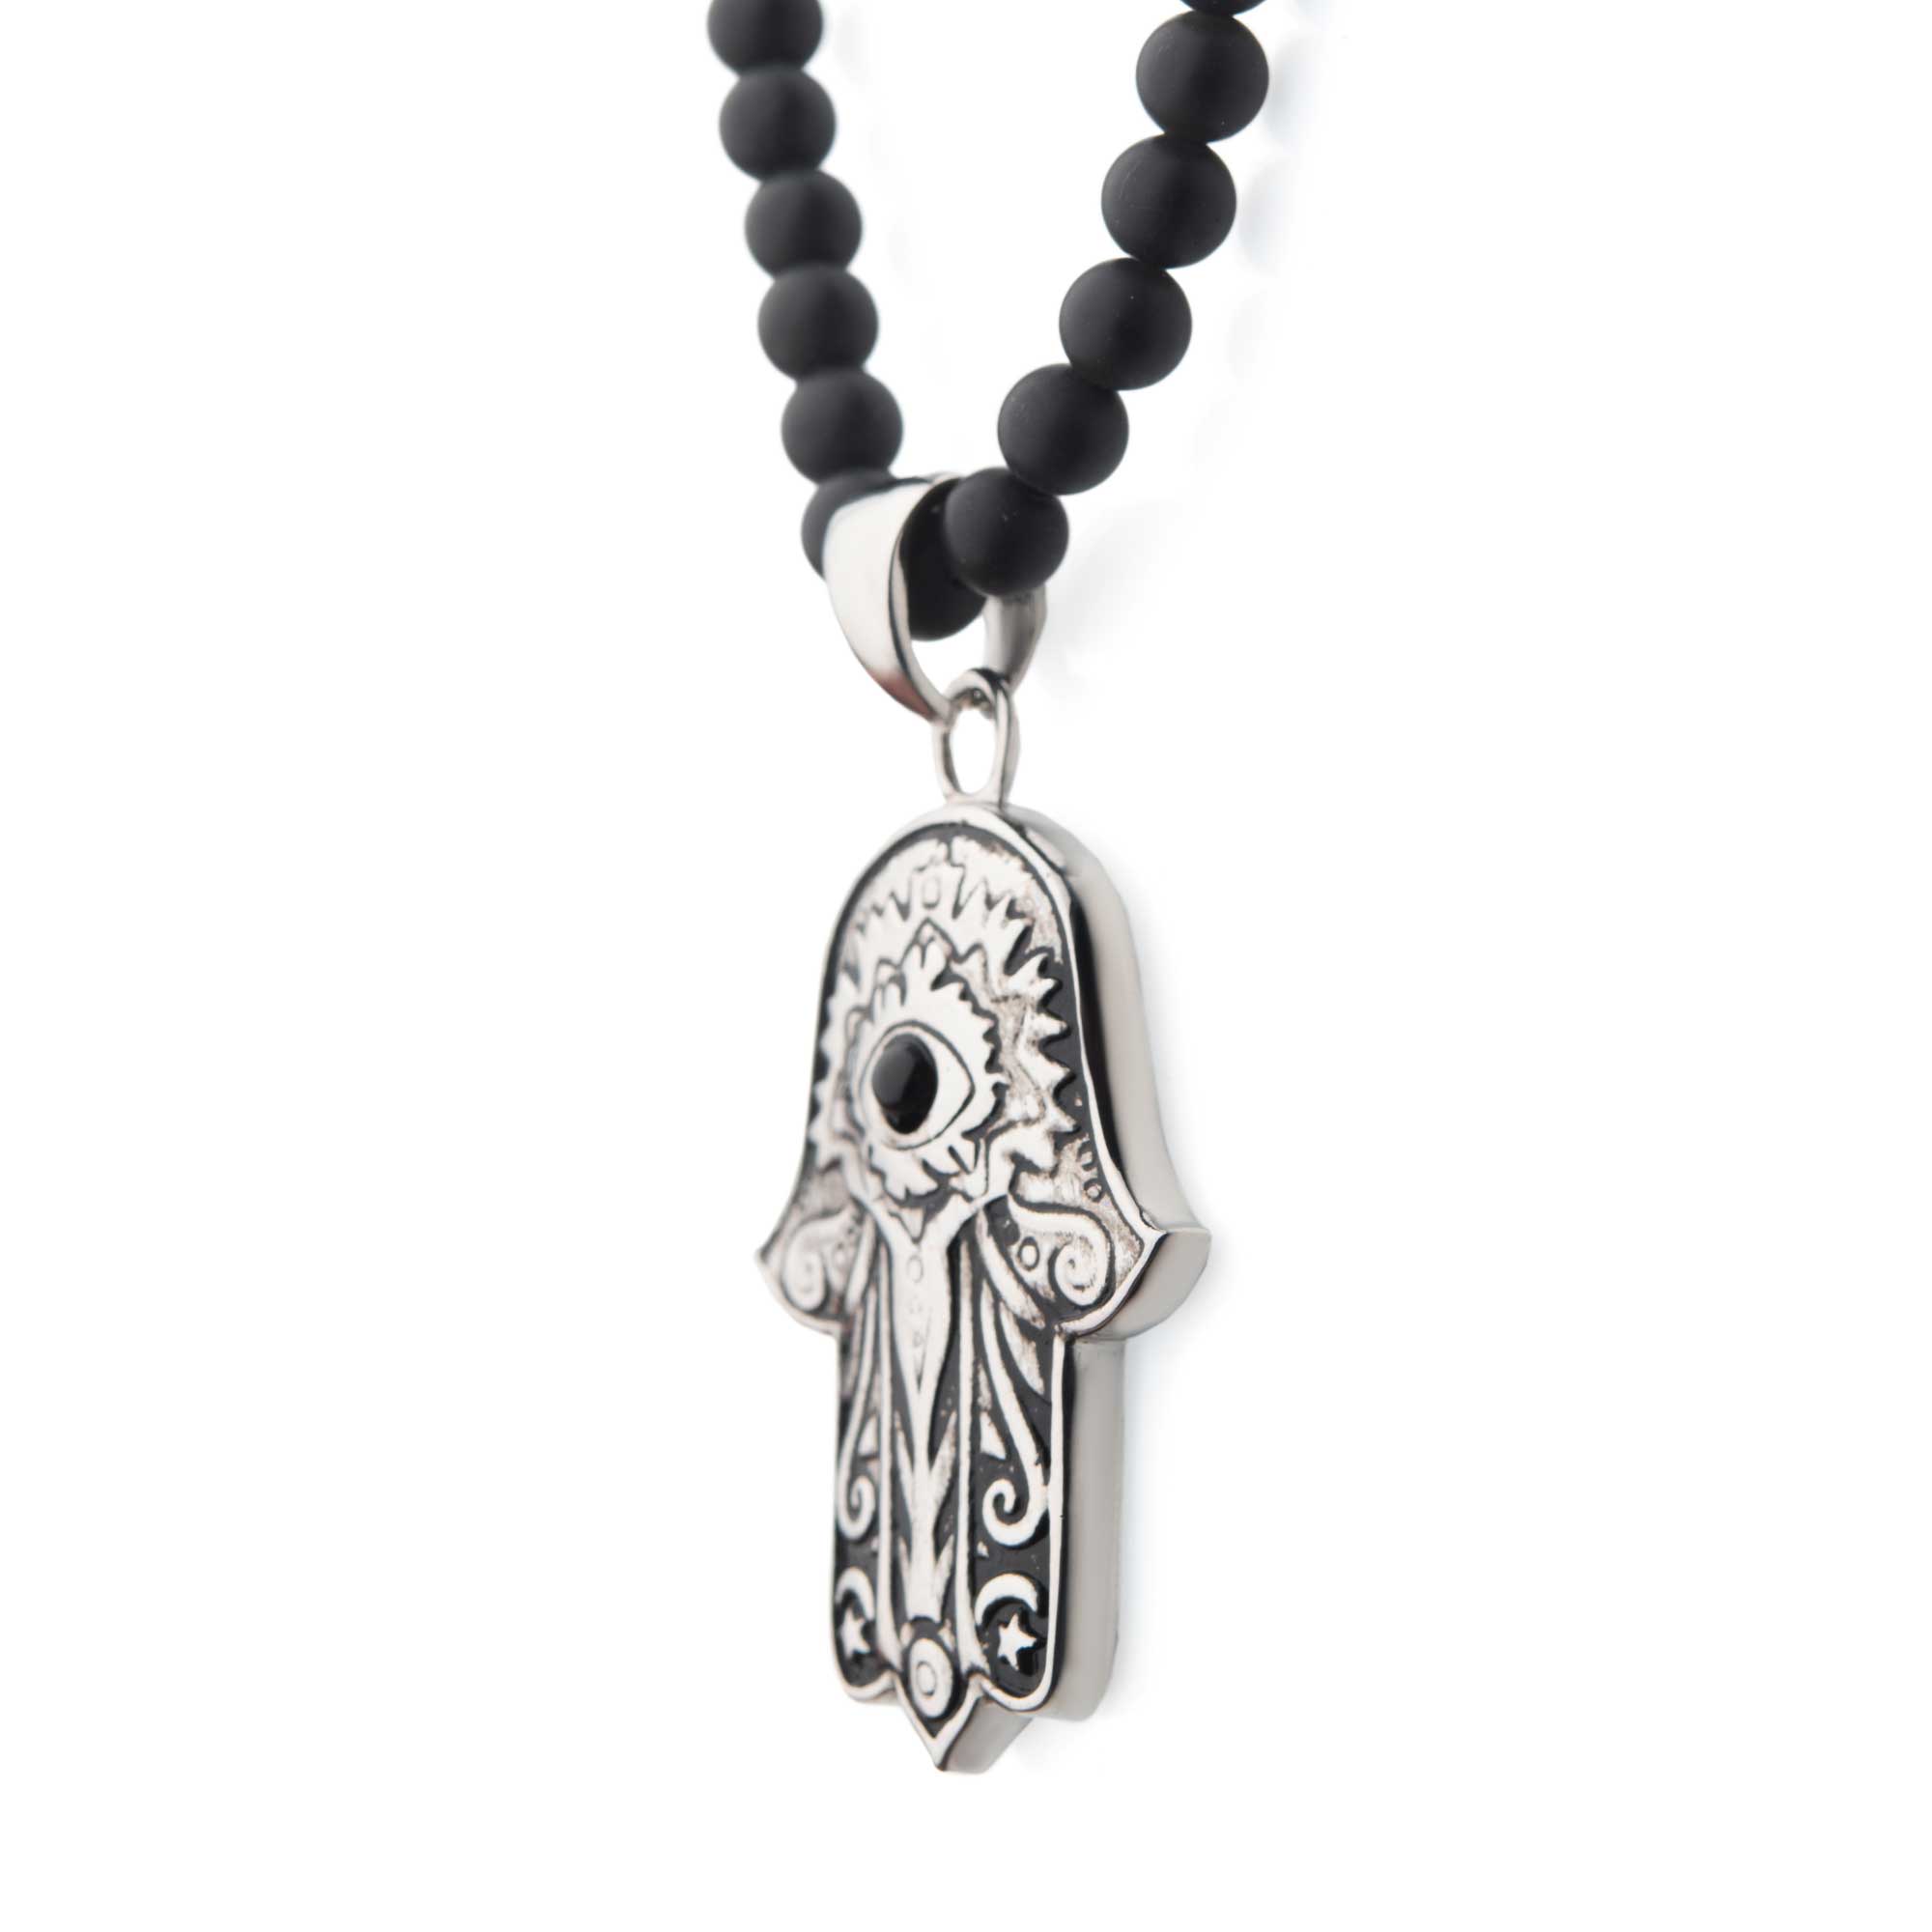 Stainless Steel with Centerpiece Black Agate Stone Hamsa Pendant, with Black Agate Stone Bead Necklace Image 3 Morin Jewelers Southbridge, MA